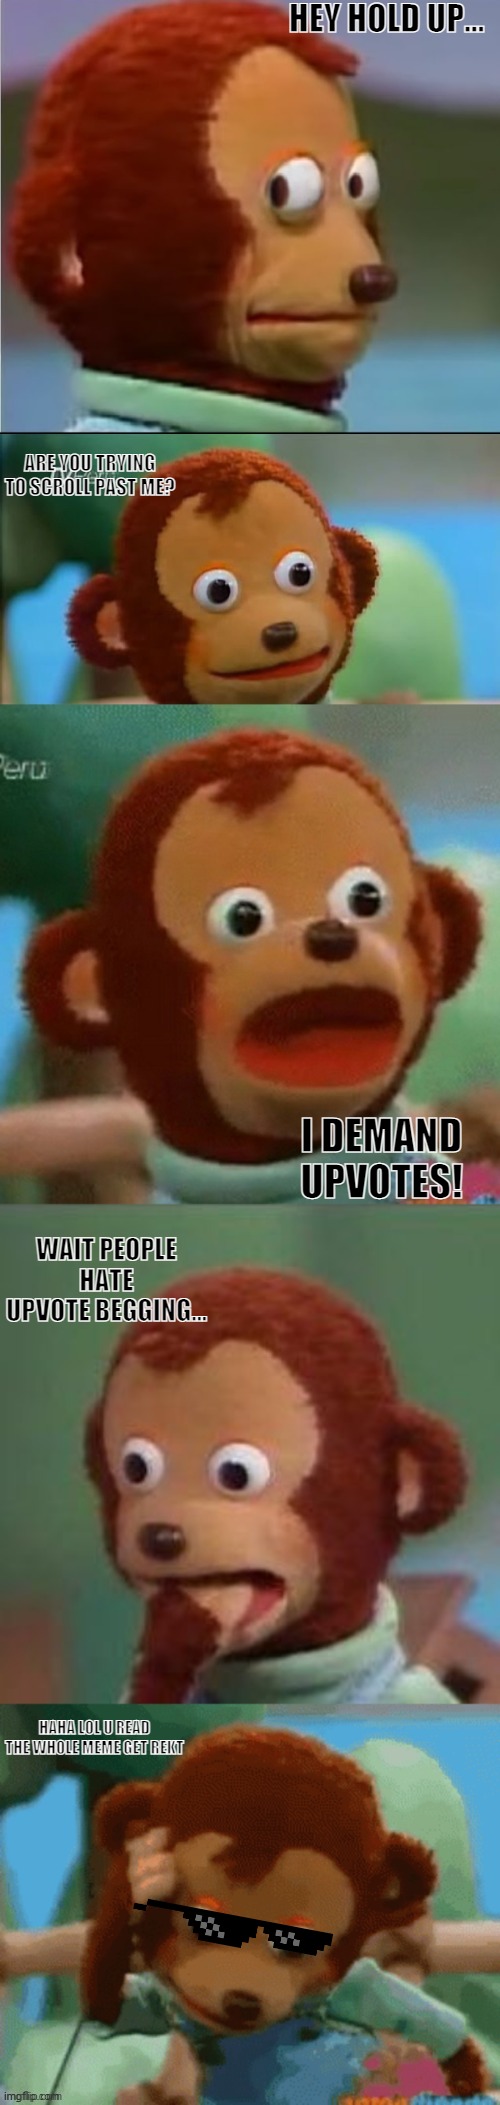 monke upvote | HEY HOLD UP... ARE YOU TRYING TO SCROLL PAST ME? I DEMAND UPVOTES! WAIT PEOPLE HATE UPVOTE BEGGING... HAHA LOL U READ THE WHOLE MEME GET REKT | image tagged in surprised monkey puppet | made w/ Imgflip meme maker